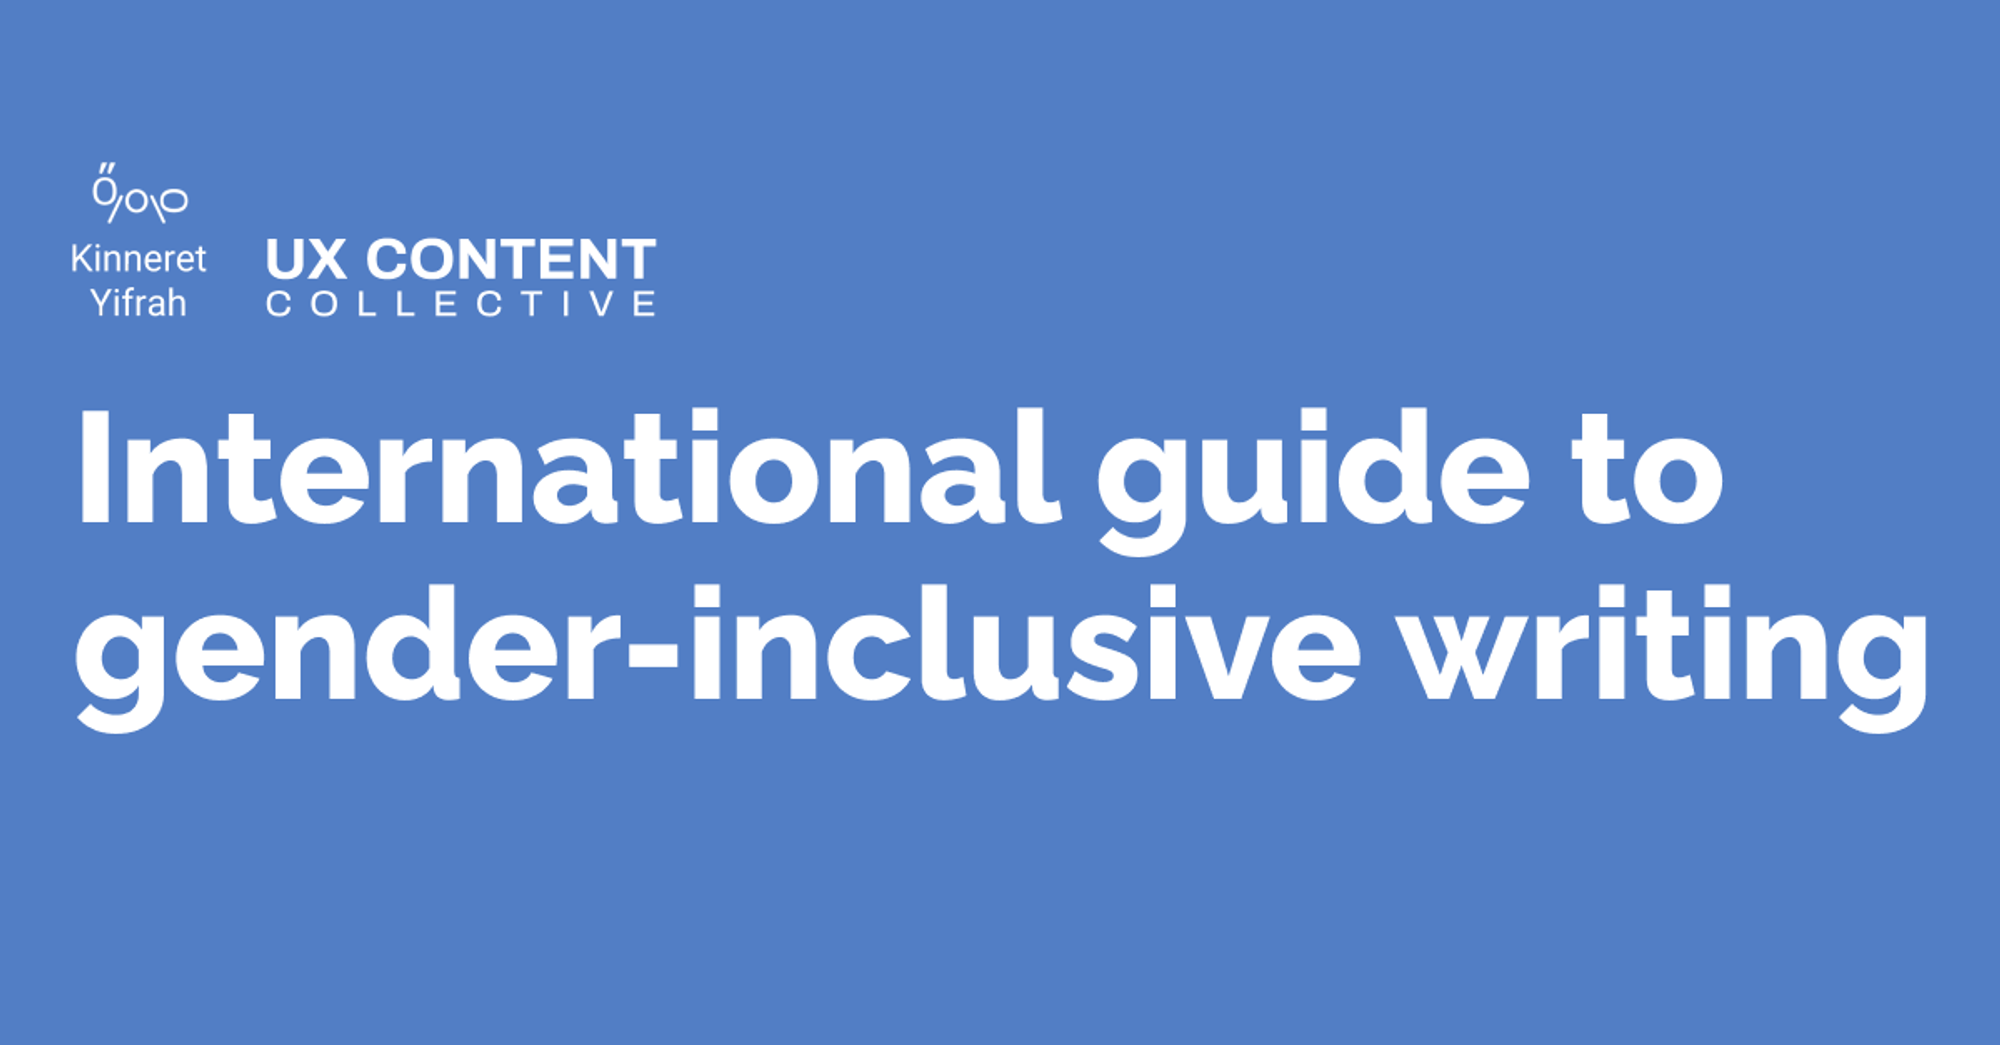 The international guide to gender-inclusive writing * UX Content Collective